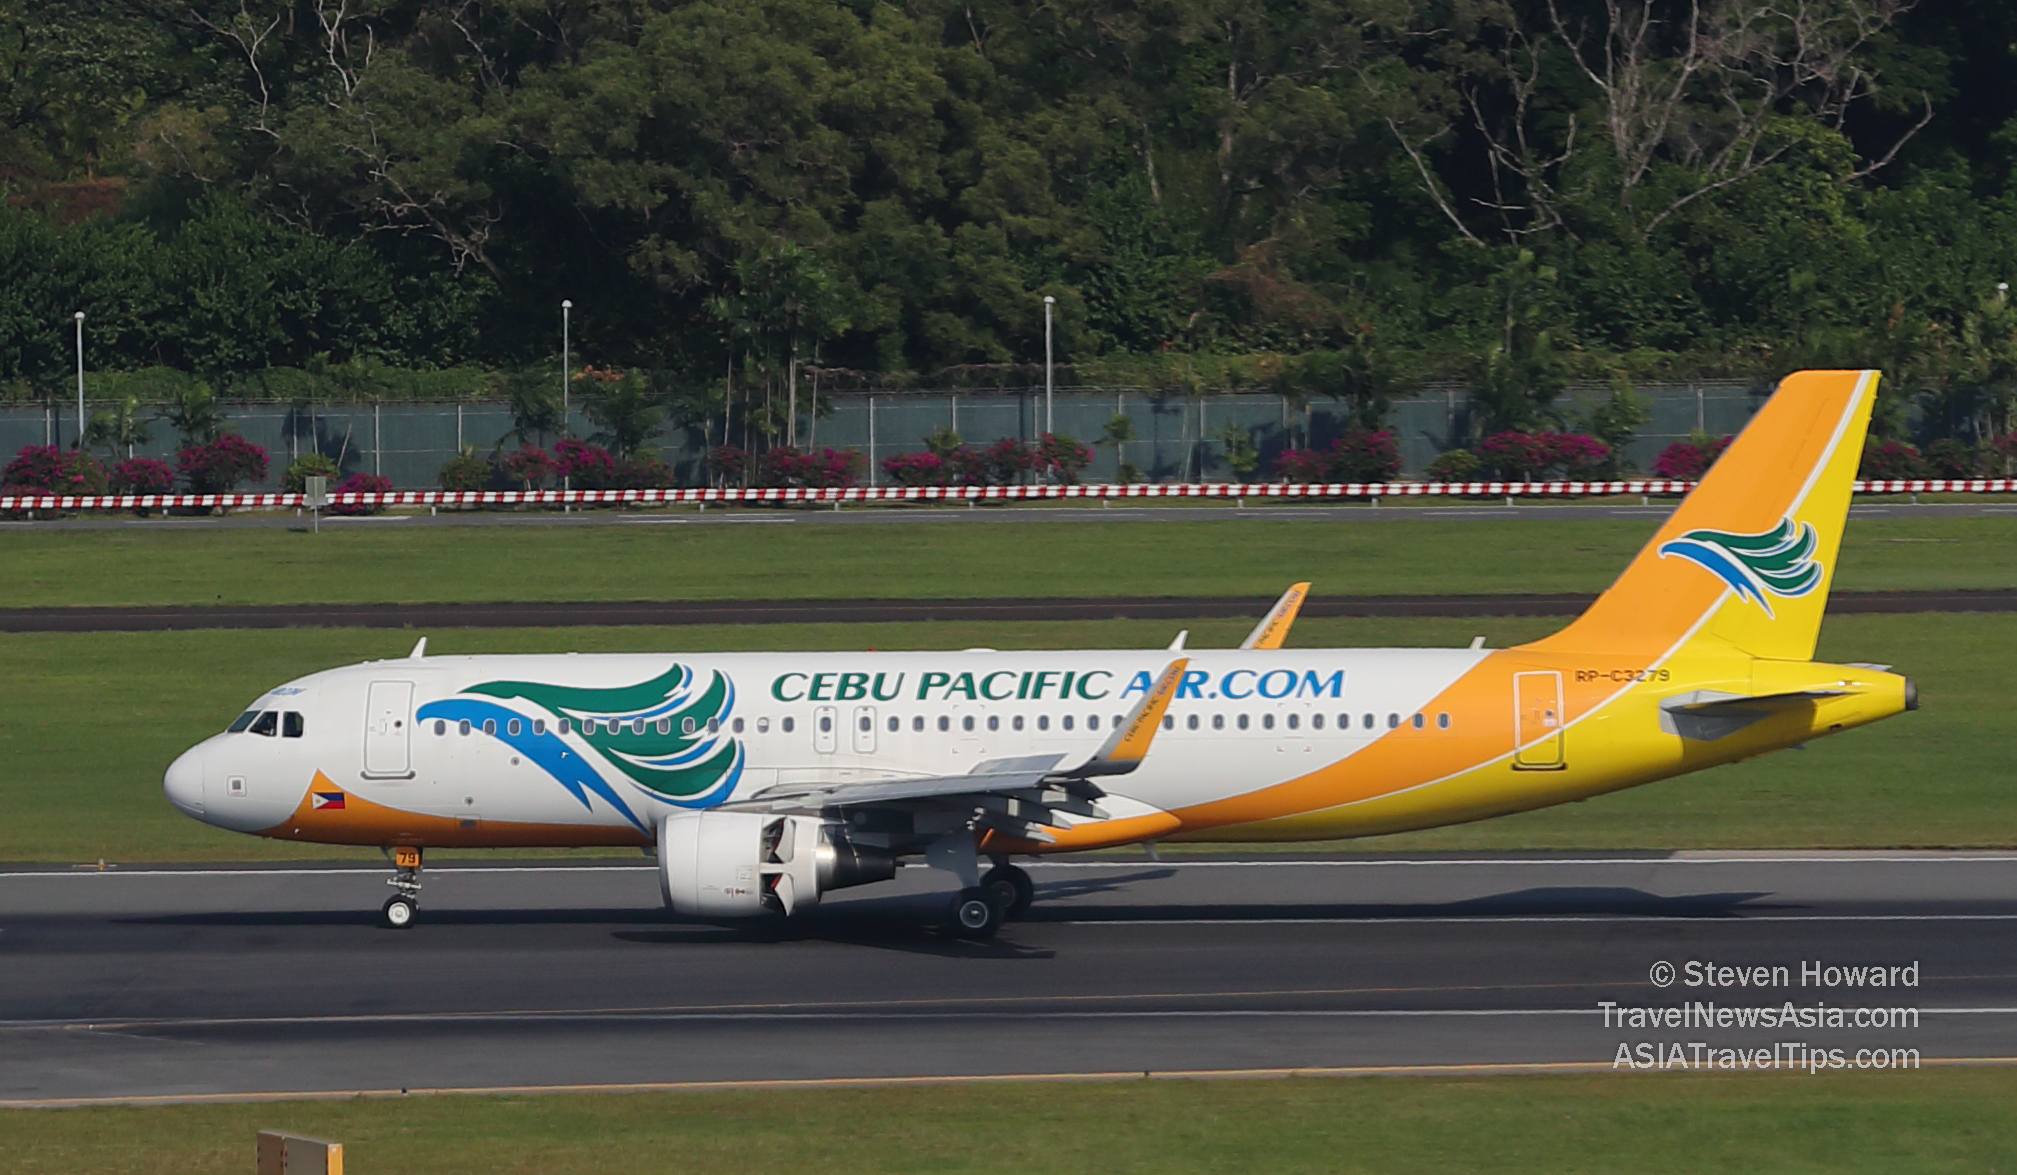 Cebu Pacific Airbus A320 MSN 6051 reg: RP-C3279. Picture by Steven Howard of TravelNewsAsia.com Click to enlarge.